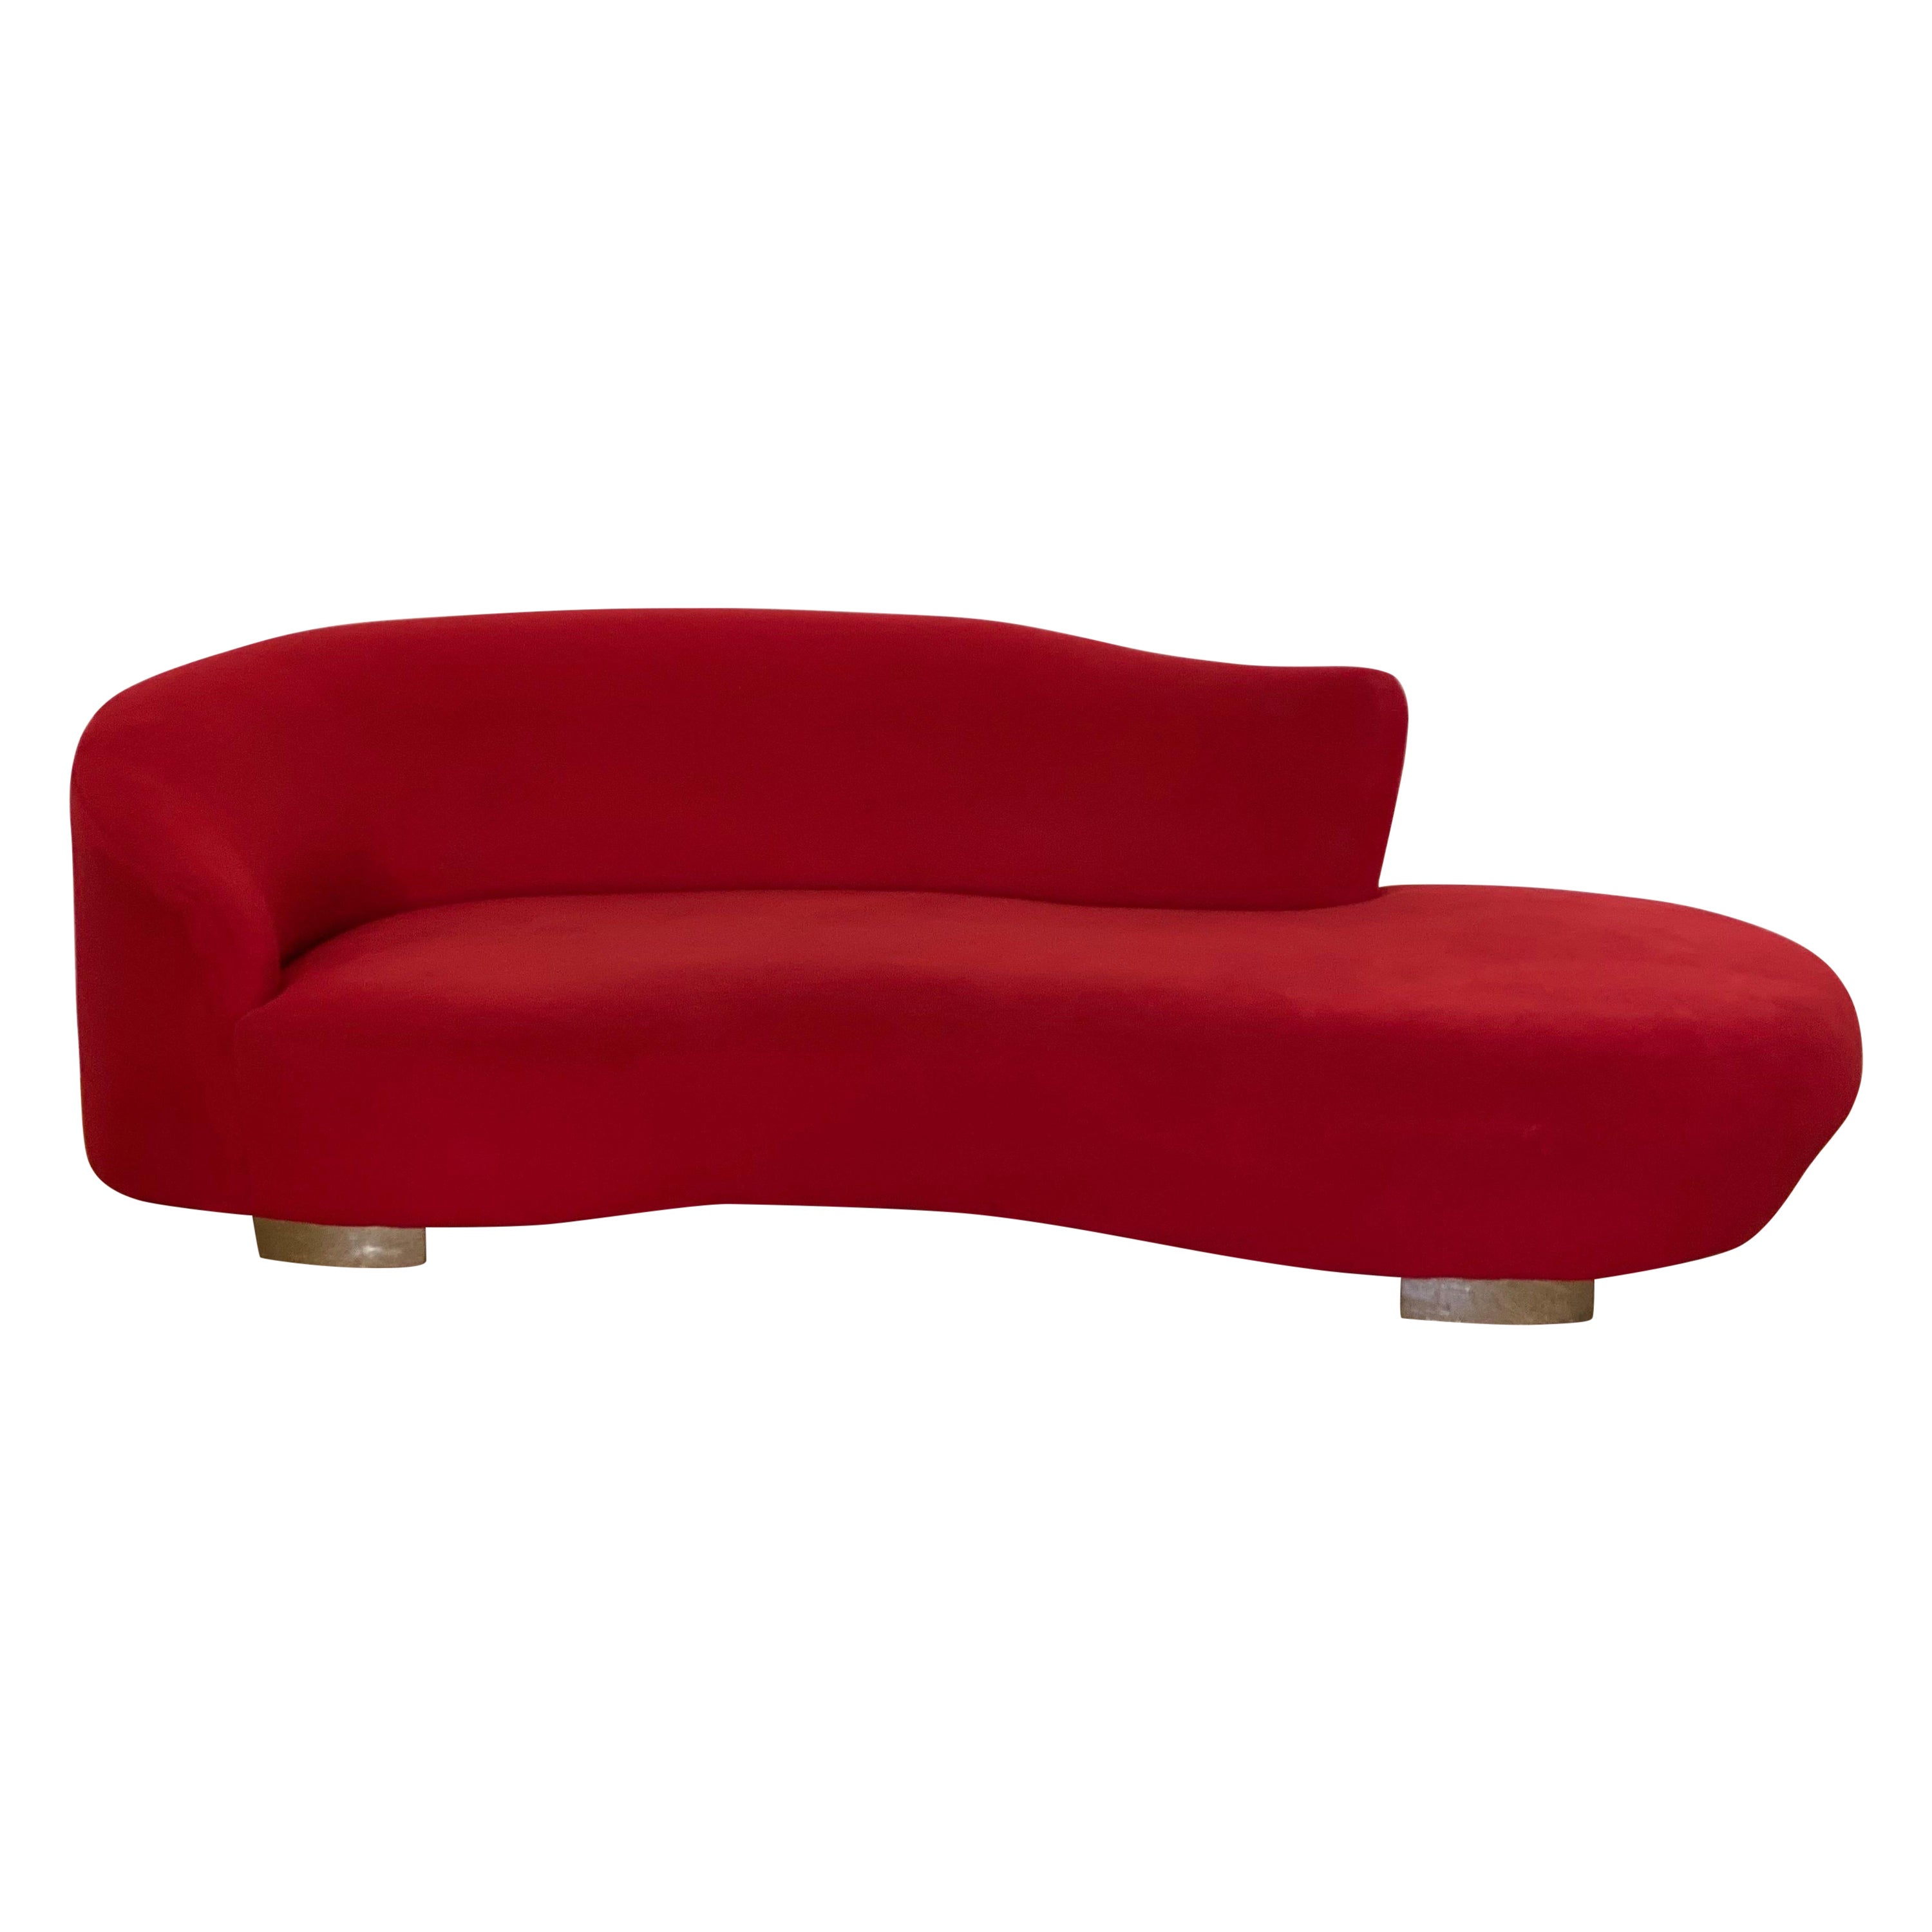 1980s Vintage Curved Cloud Red Sofa For Sale